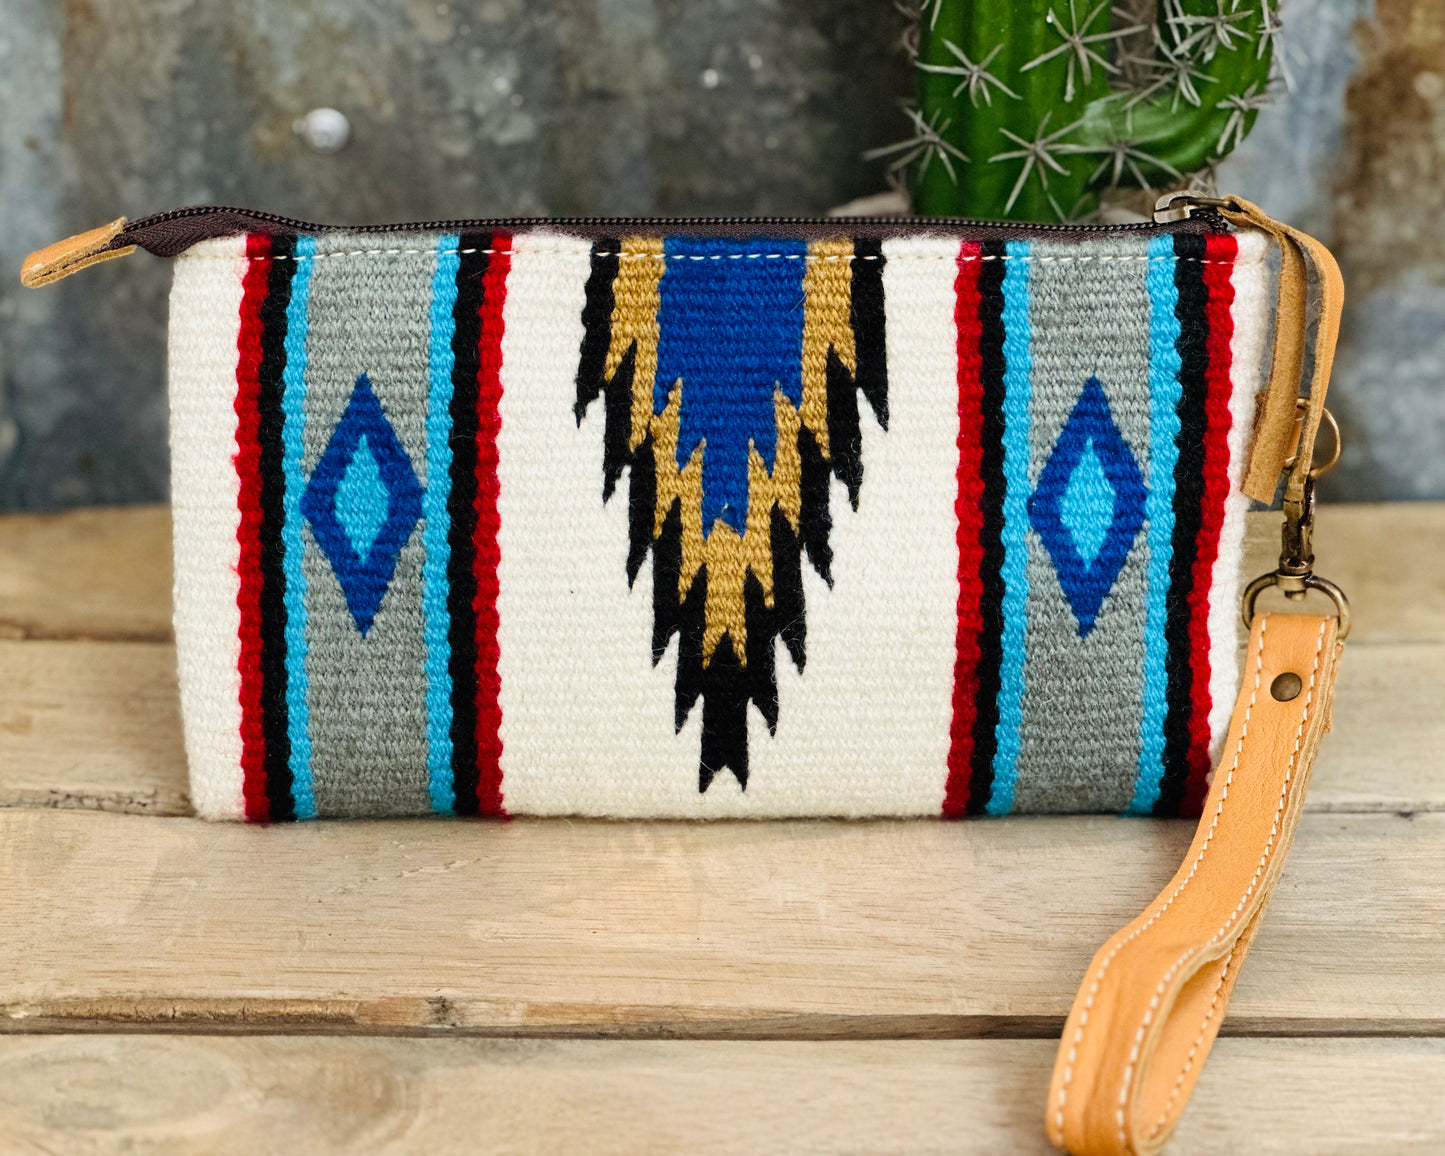 White Saddle Blanket Clutch with Brown Tooling Details